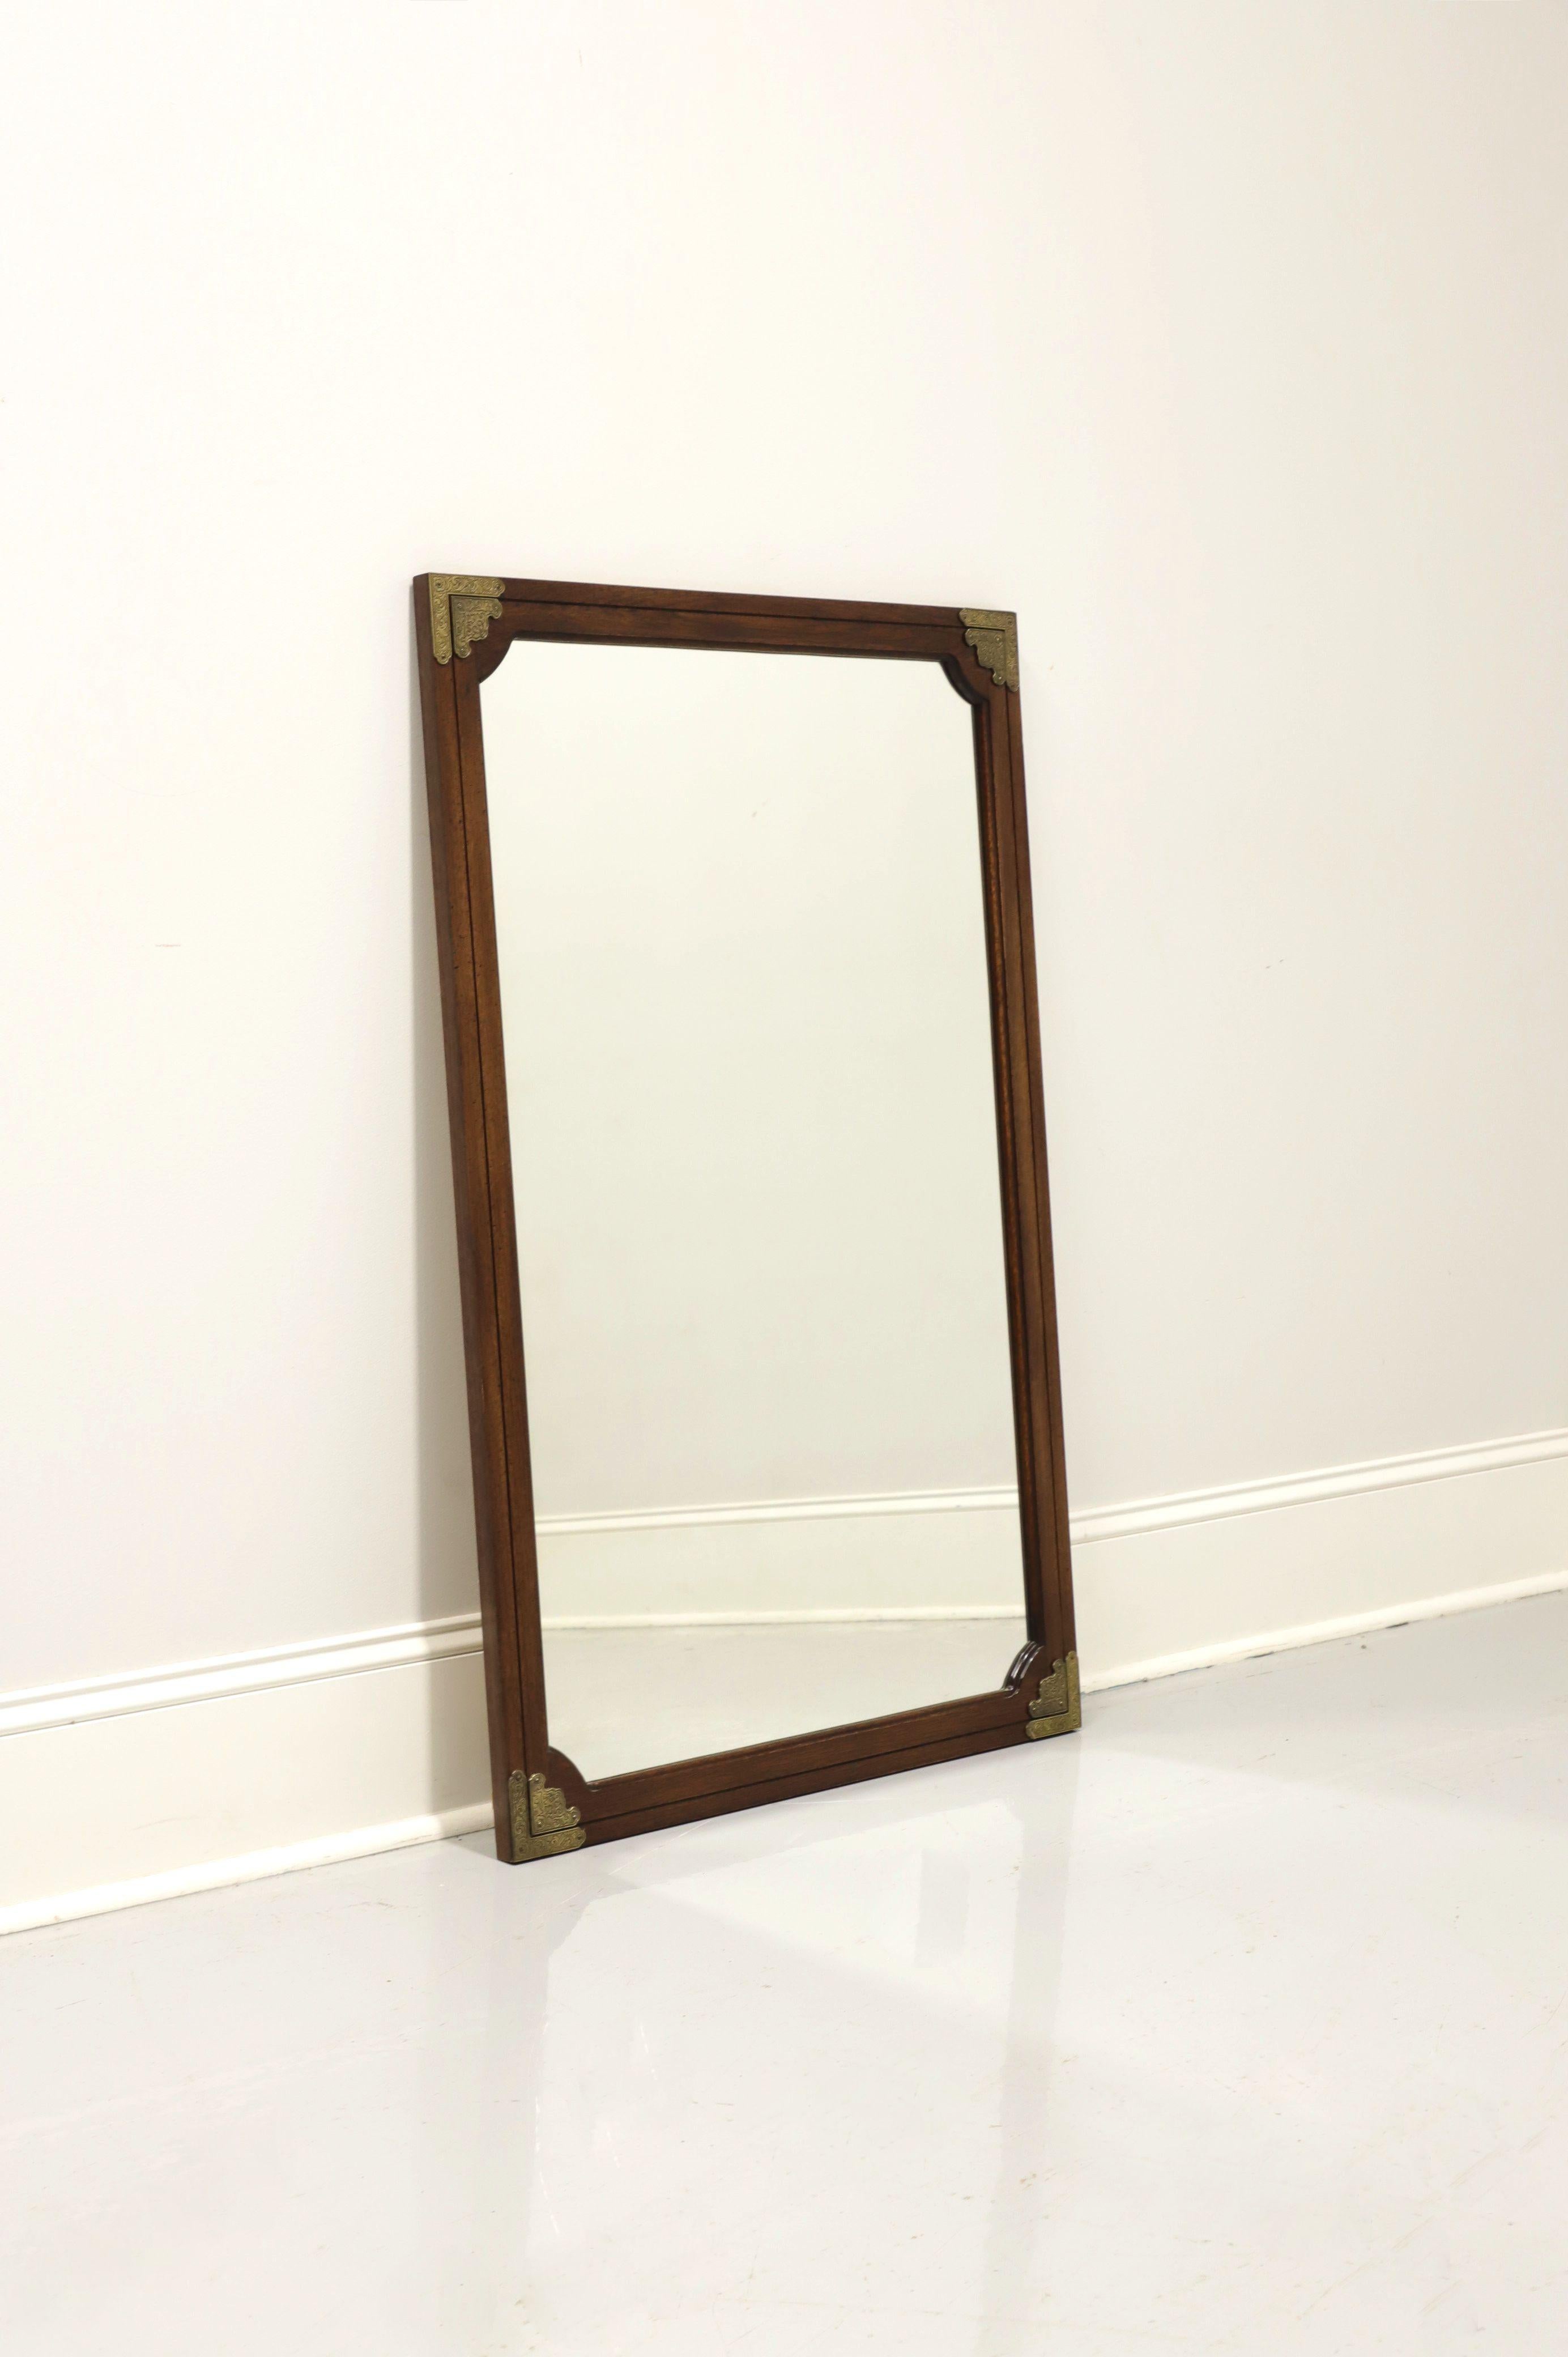 A Japanese Tansu Campaign style wall mirror by Huntley Thomasville. Mirror glass and rectangular banded walnut frame with decorative brass accents. Made in North Carolina, USA, in the mid 20th Century.

Measures: 27.25 W 1 D 43.25 H, Weighs